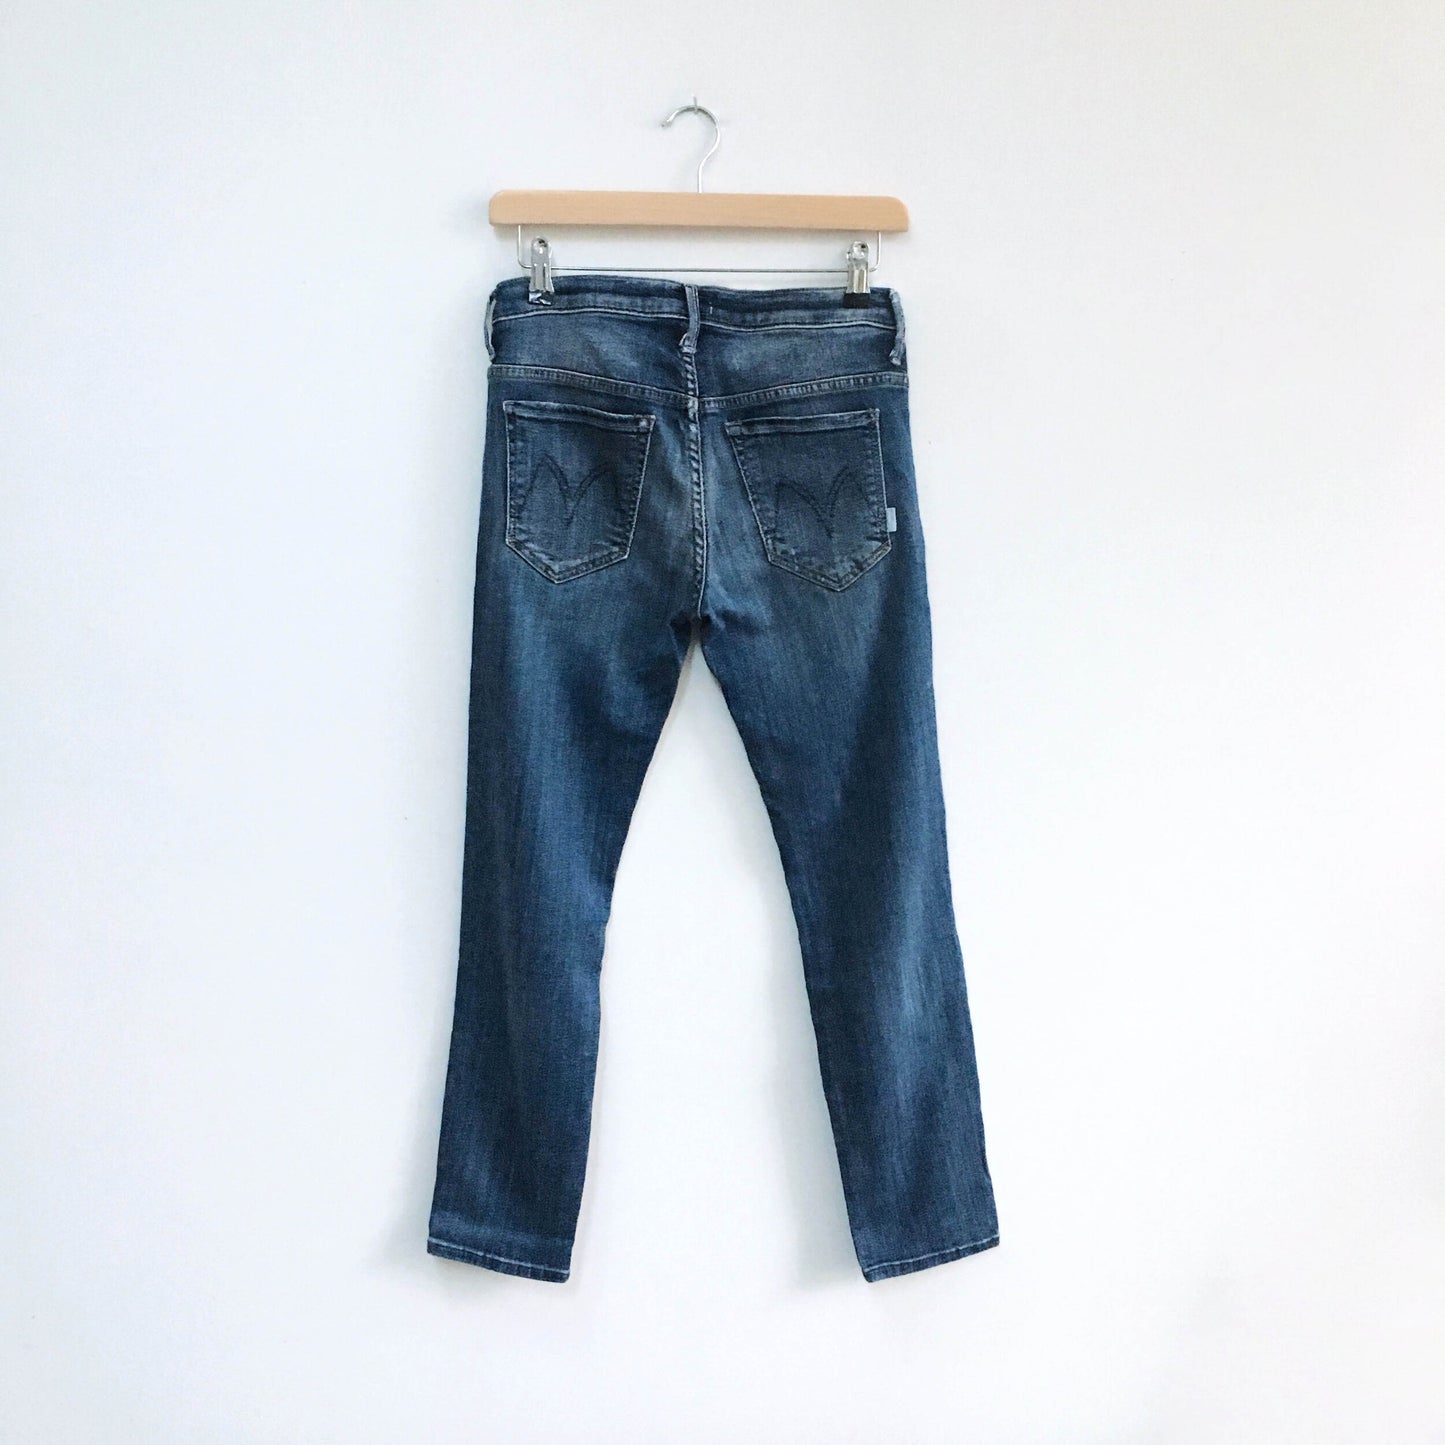 MOTHER Mid-rise Skinny not skinny - size 27